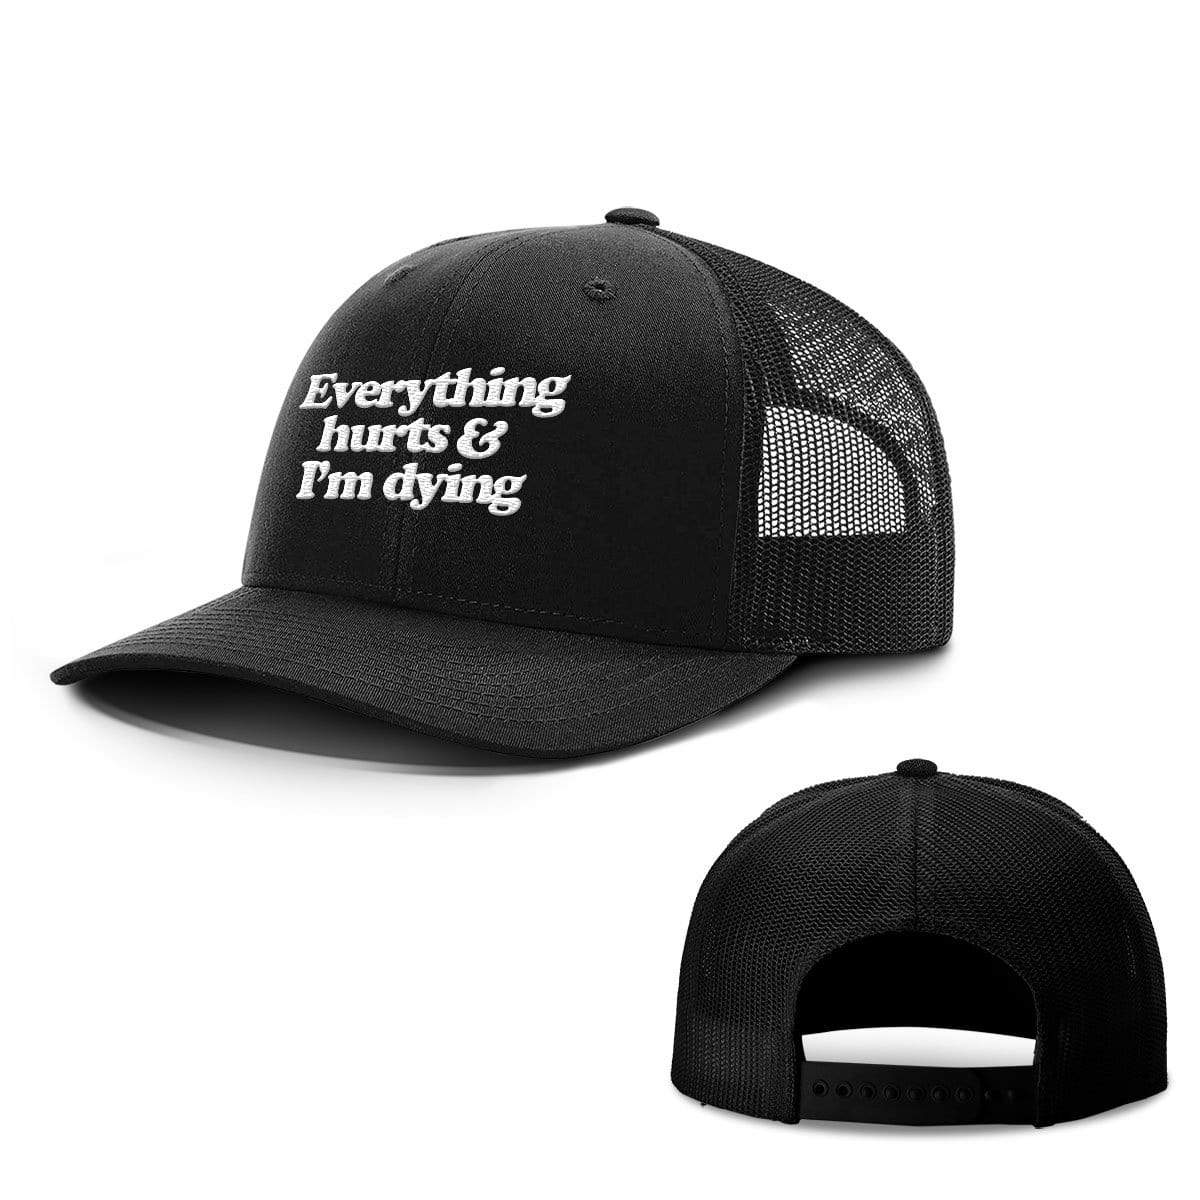 SunFrog-Busted Hats Snapback / Full Black / One Size Everything Hurts and I'm Dying Hats